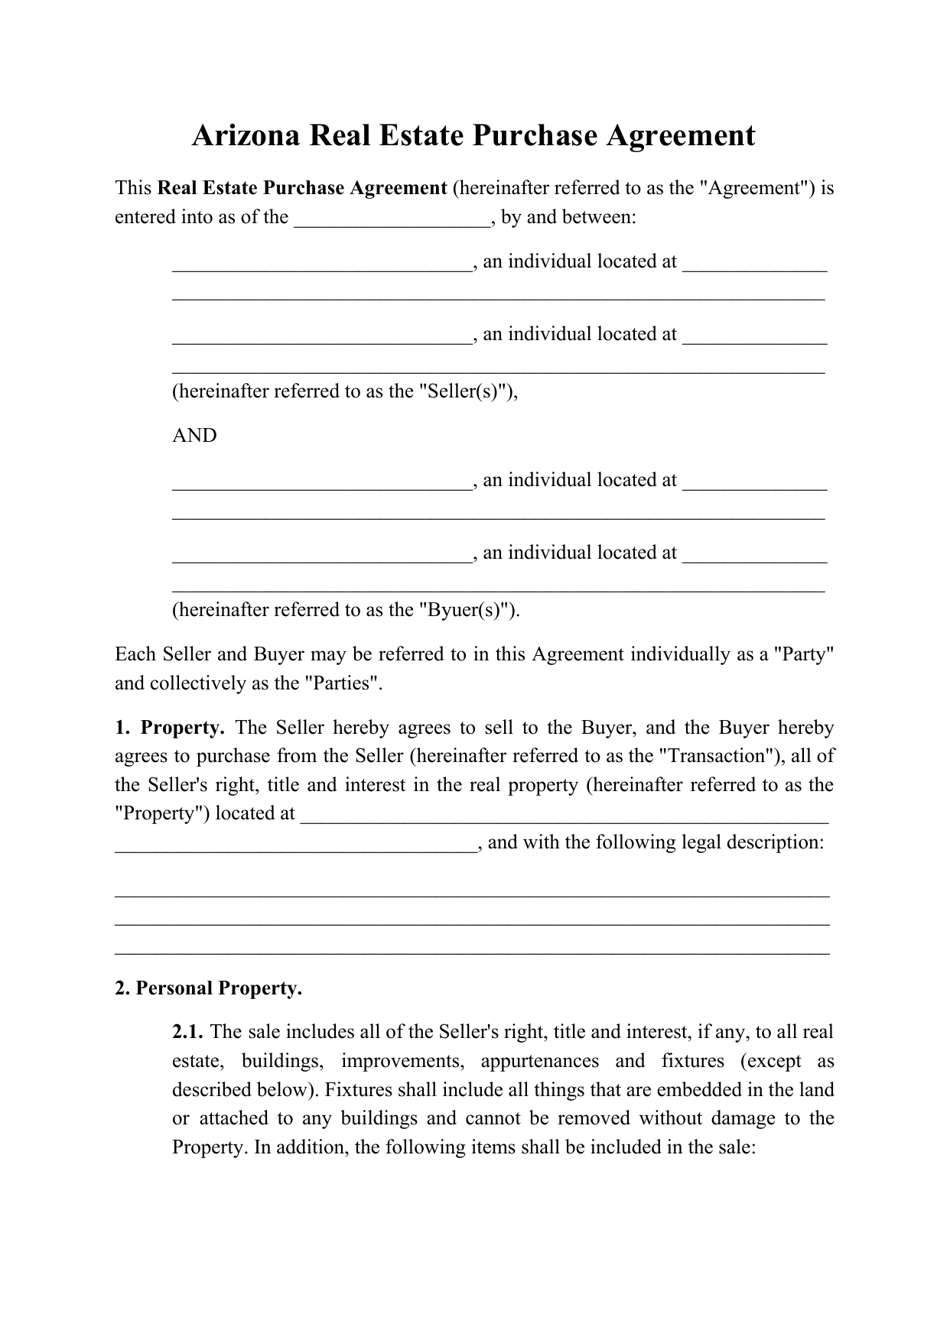 arizona-real-estate-purchase-agreement-template-fill-out-sign-online